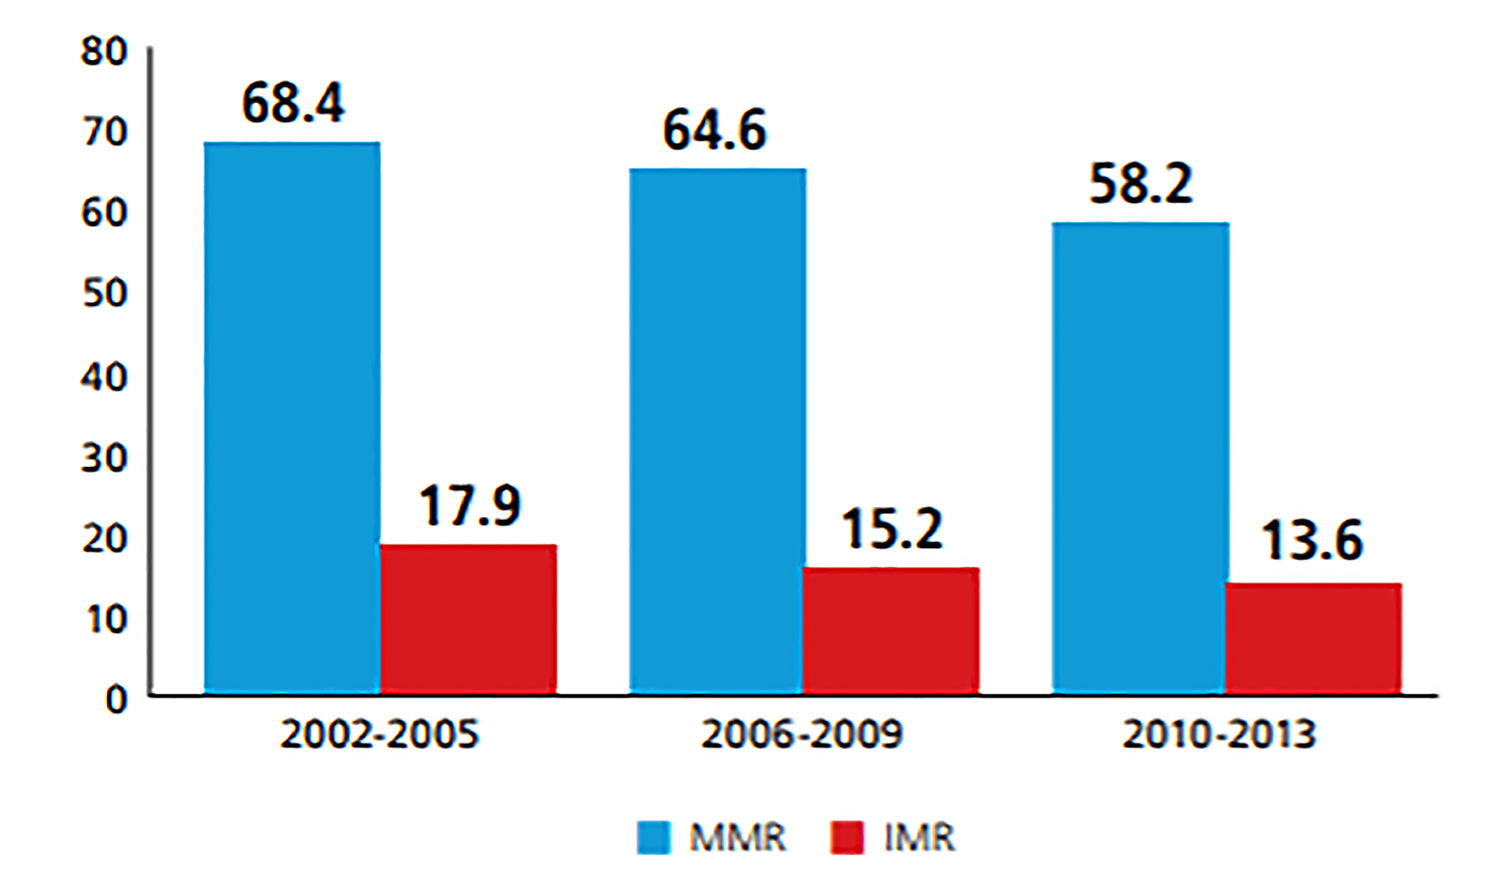 Graph depicting maternal morality rate; 68.4% in 2002-2005, 64.6% in 2006-2009, and 58.2% in 2010-2013.